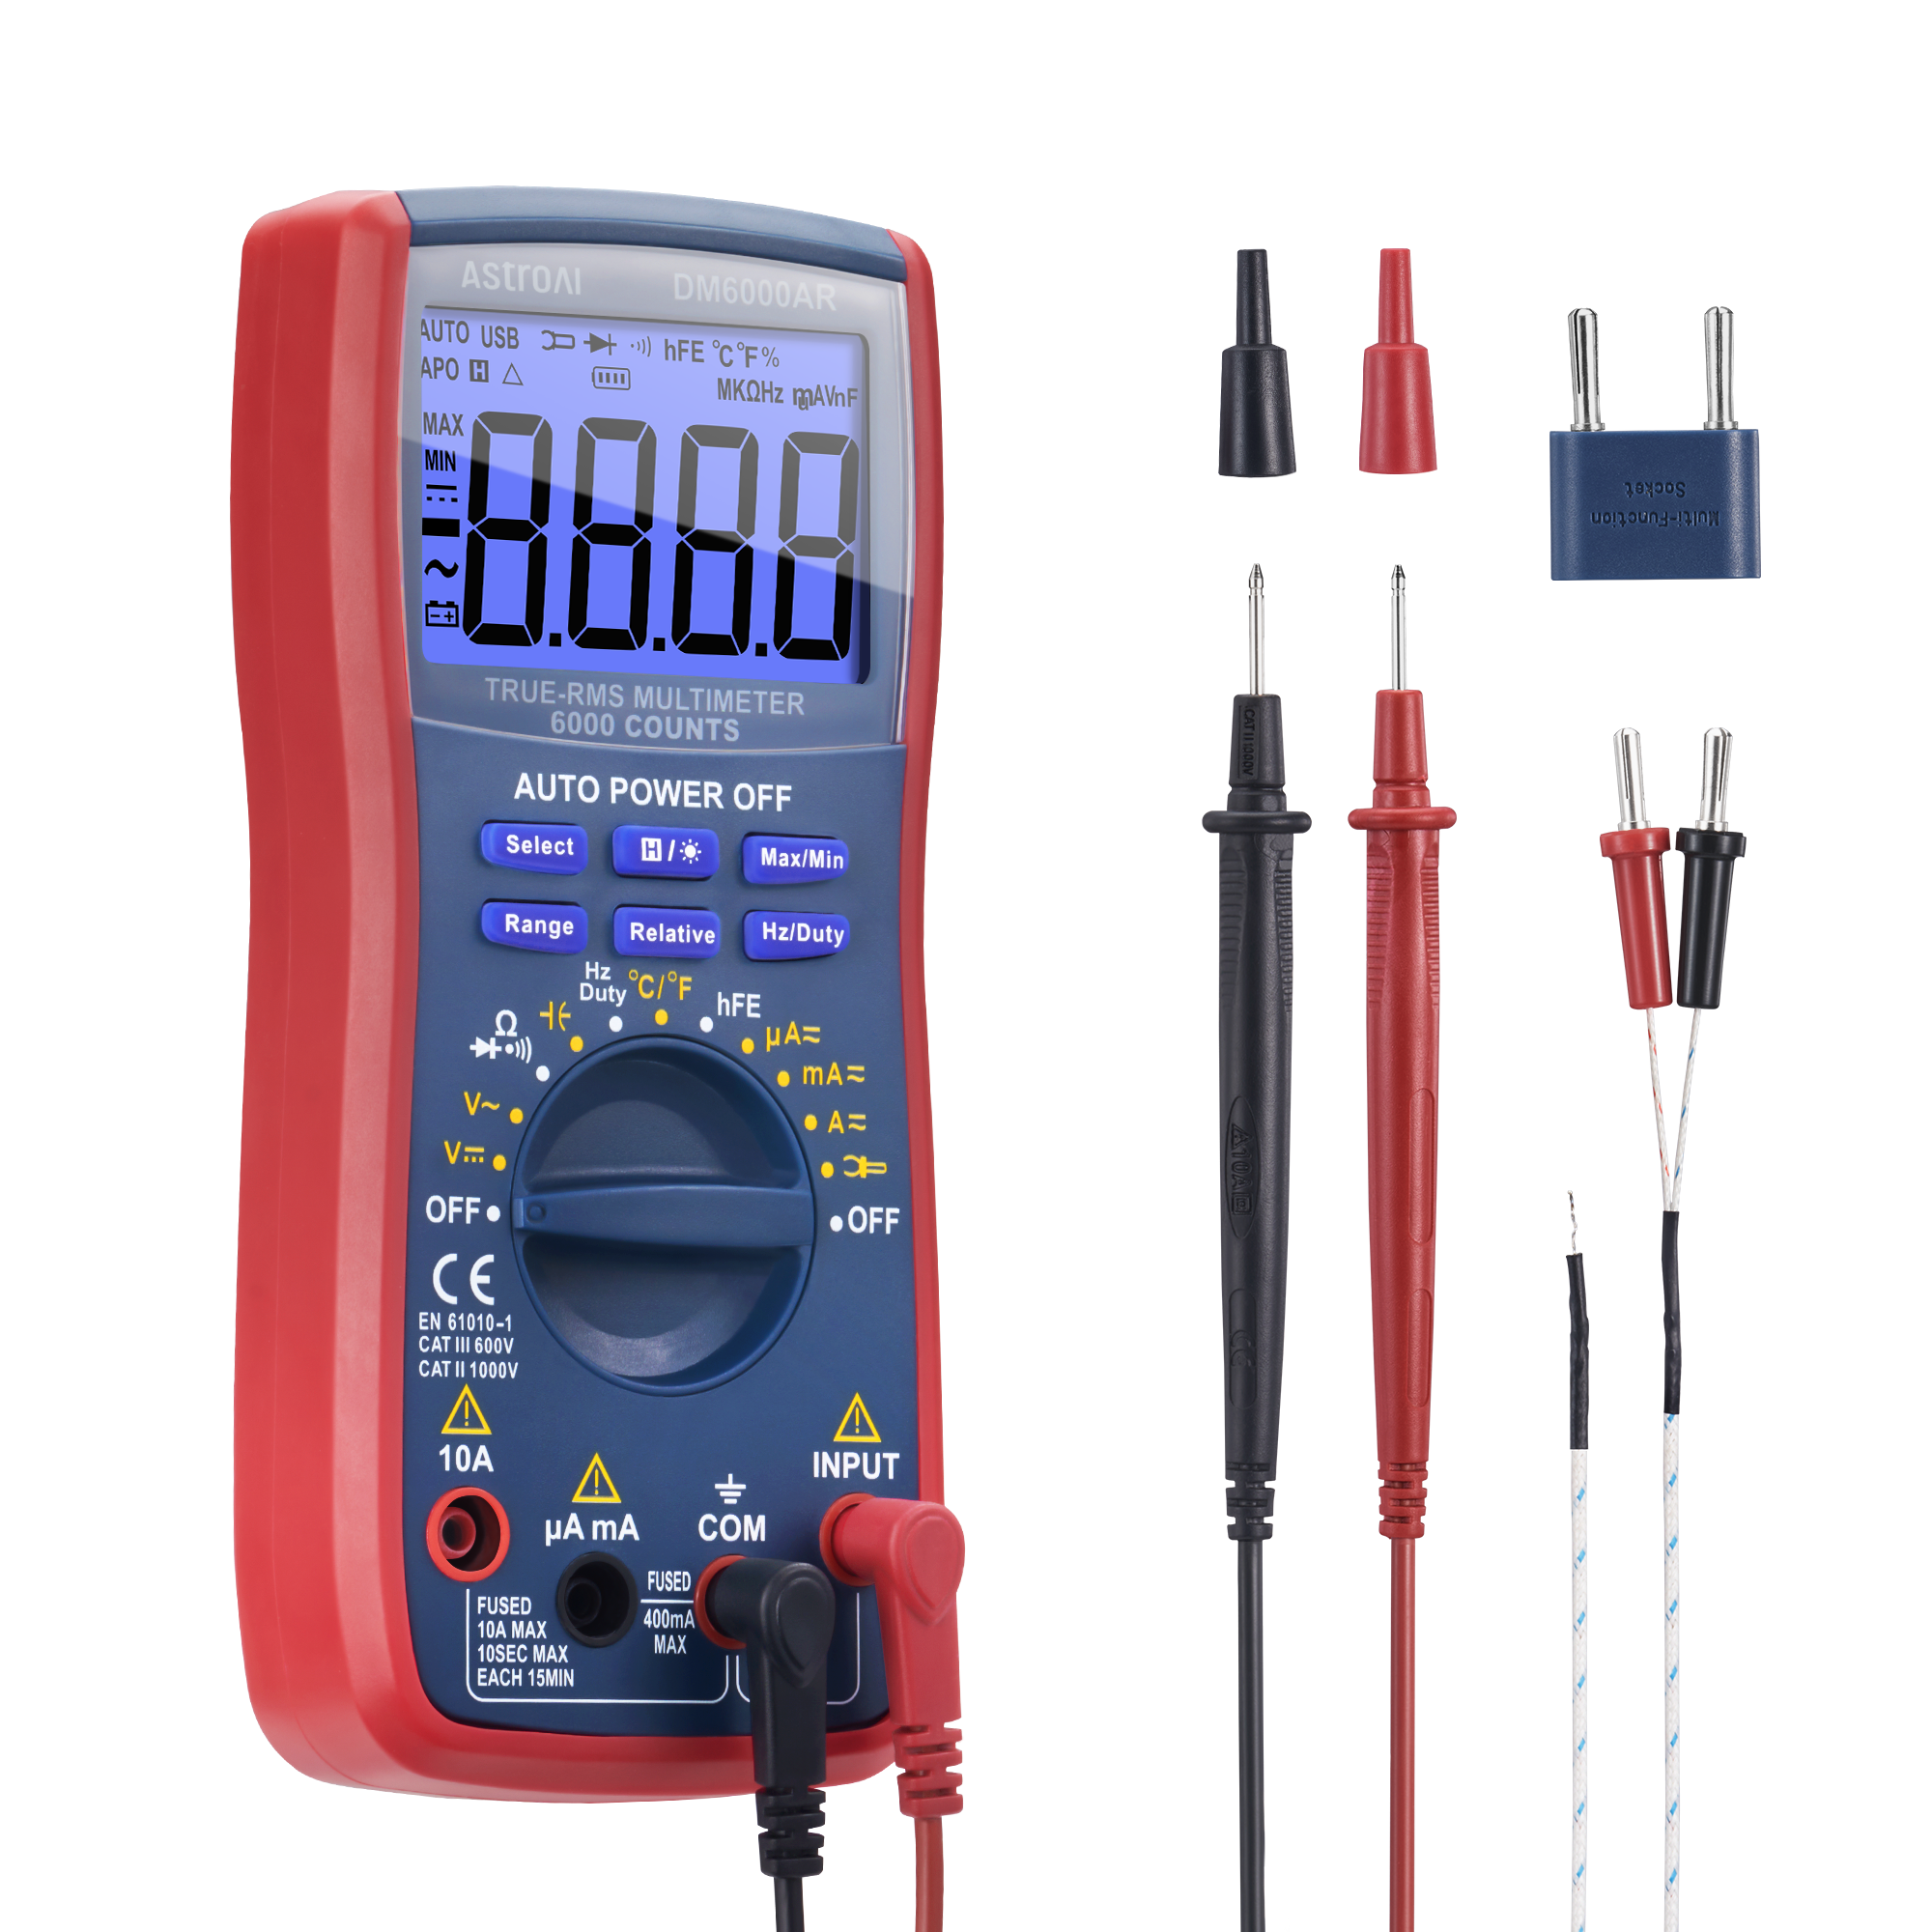 Digital Multimeter, AstroAI TRMS 6000 Counts Electrical Tester, Large Screen, Accurately Measures - image 1 of 9